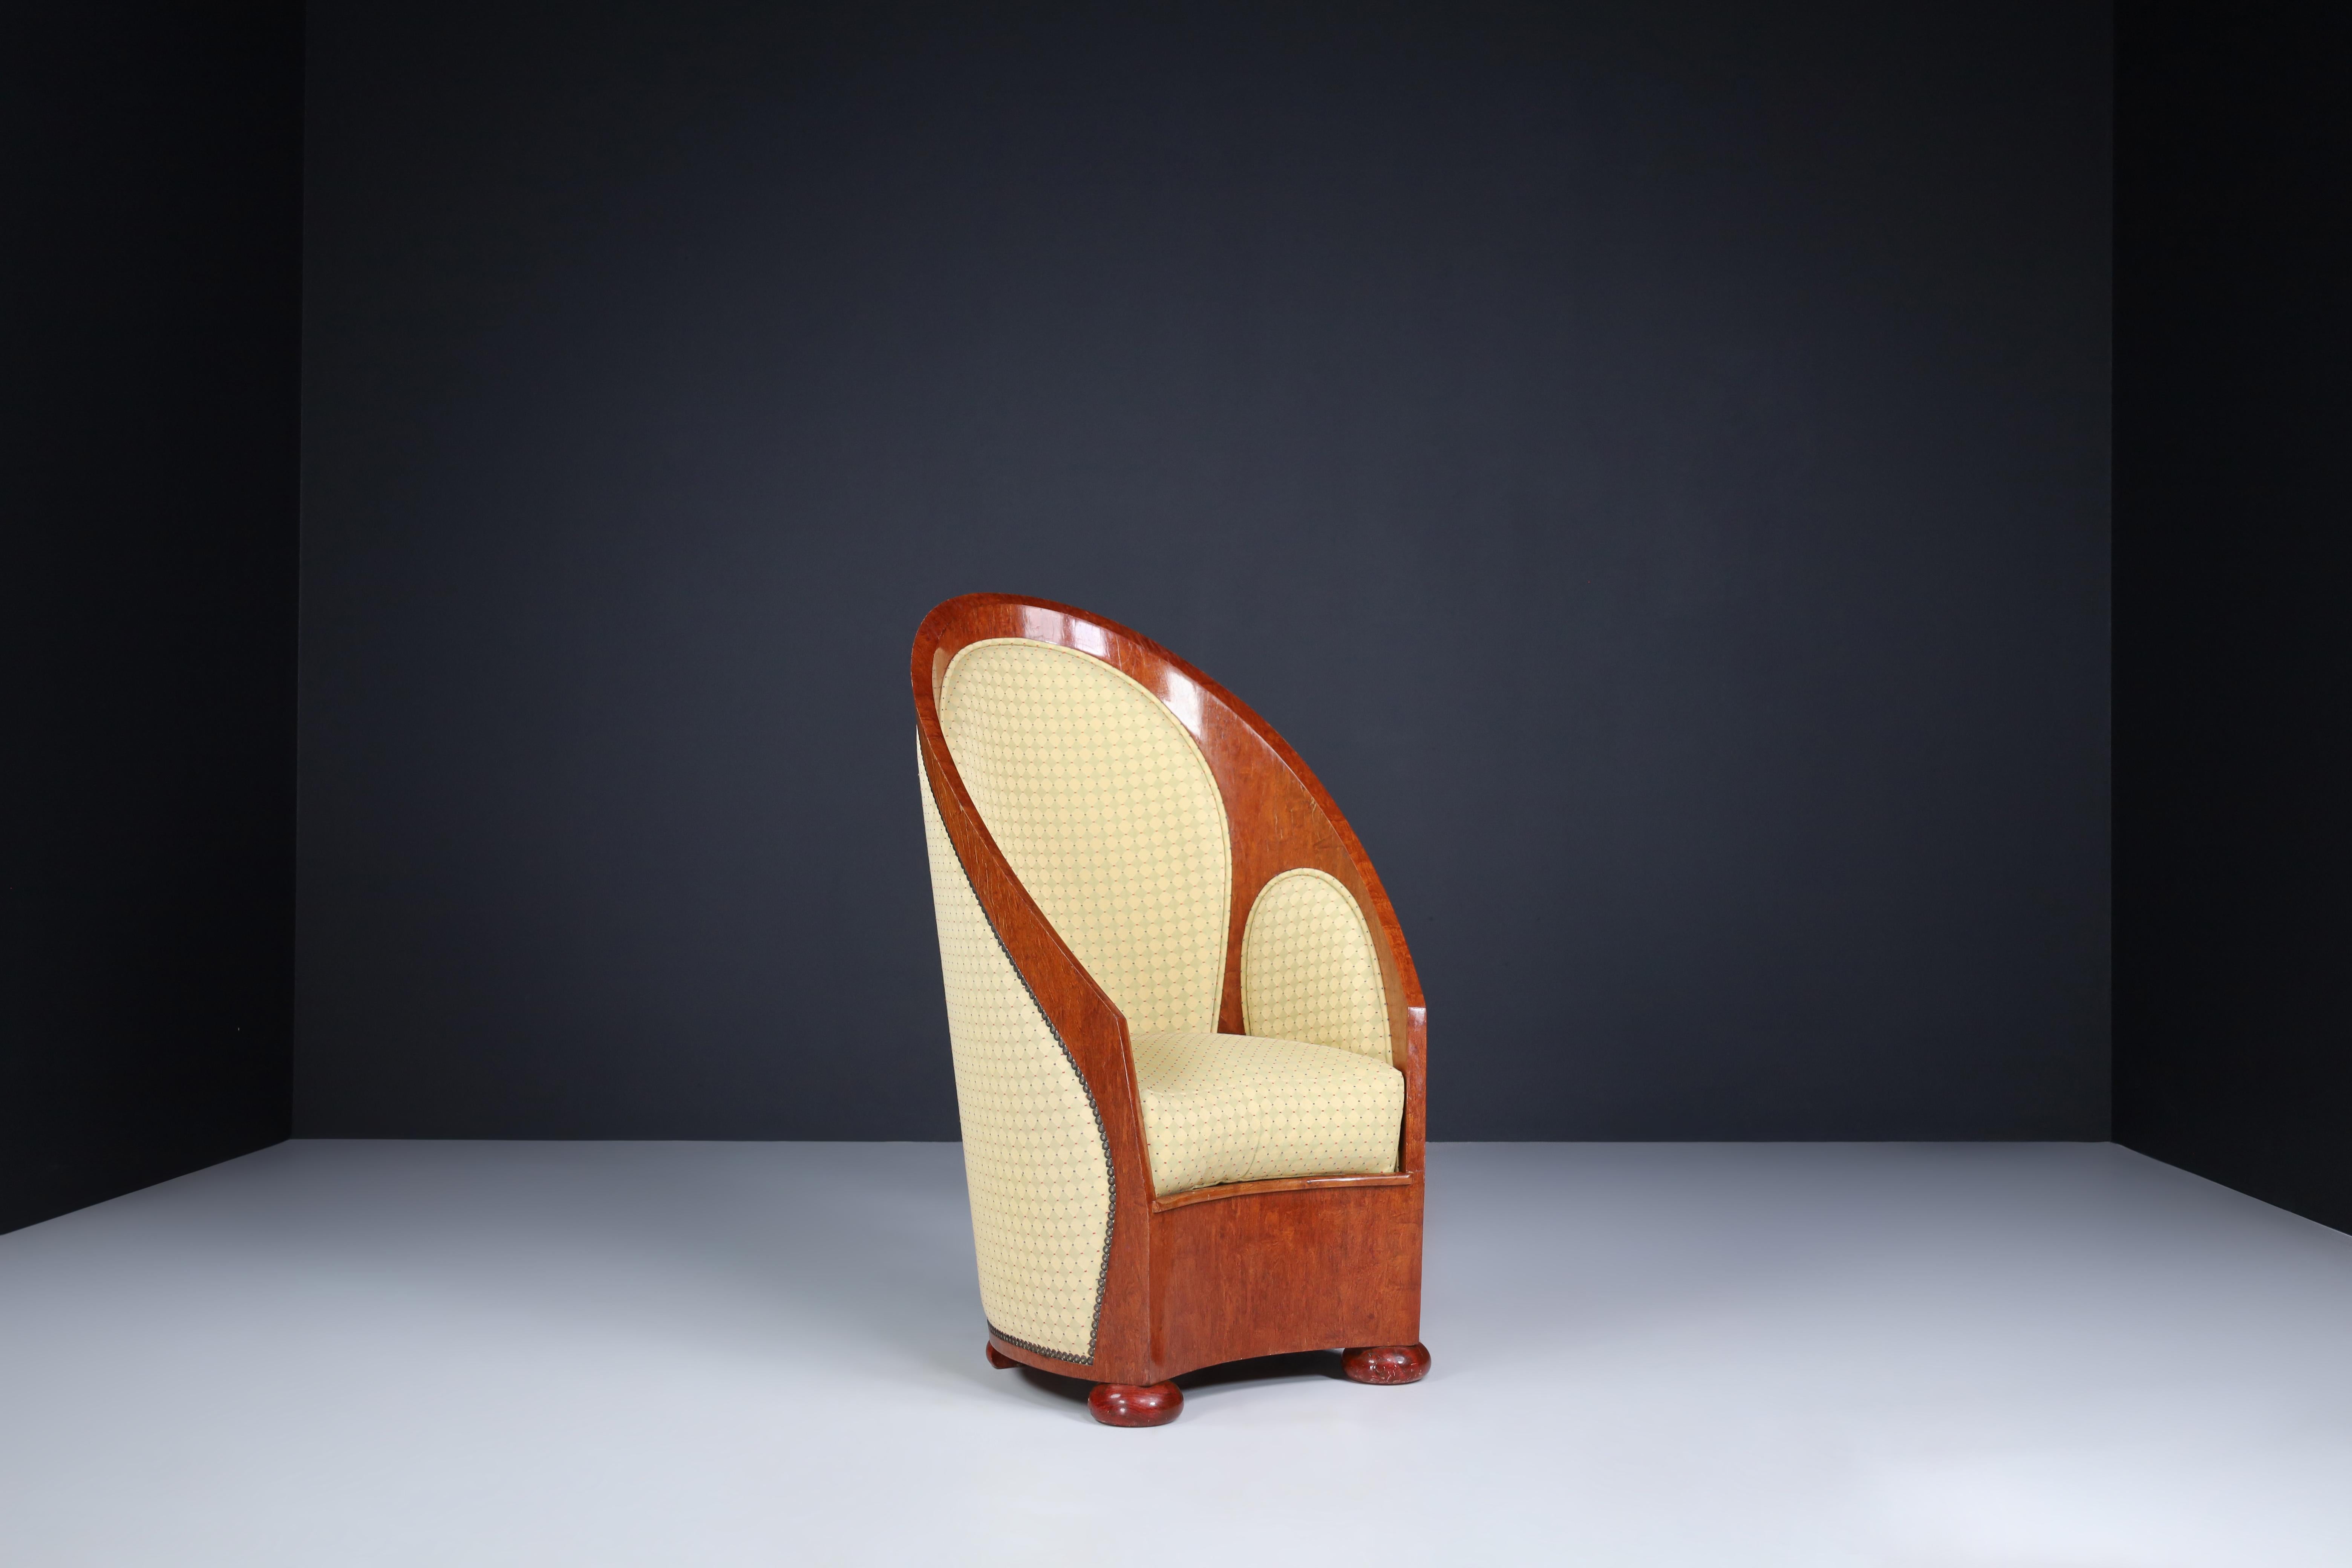 Art Deco Armchairs in Walnut and Original Upholstery, Italy, 1930s For Sale 3